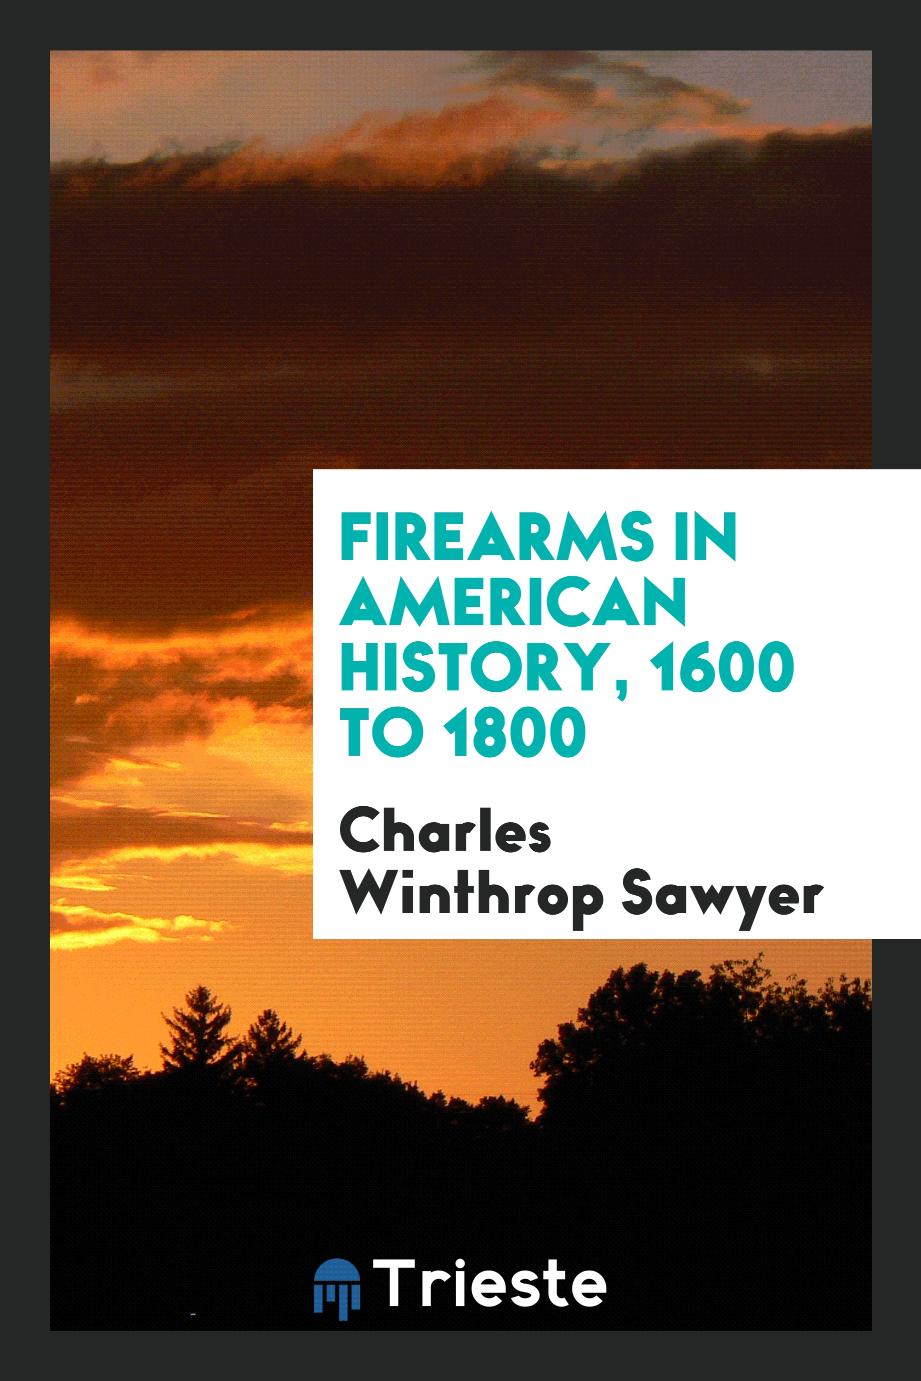 Firearms in American History, 1600 to 1800